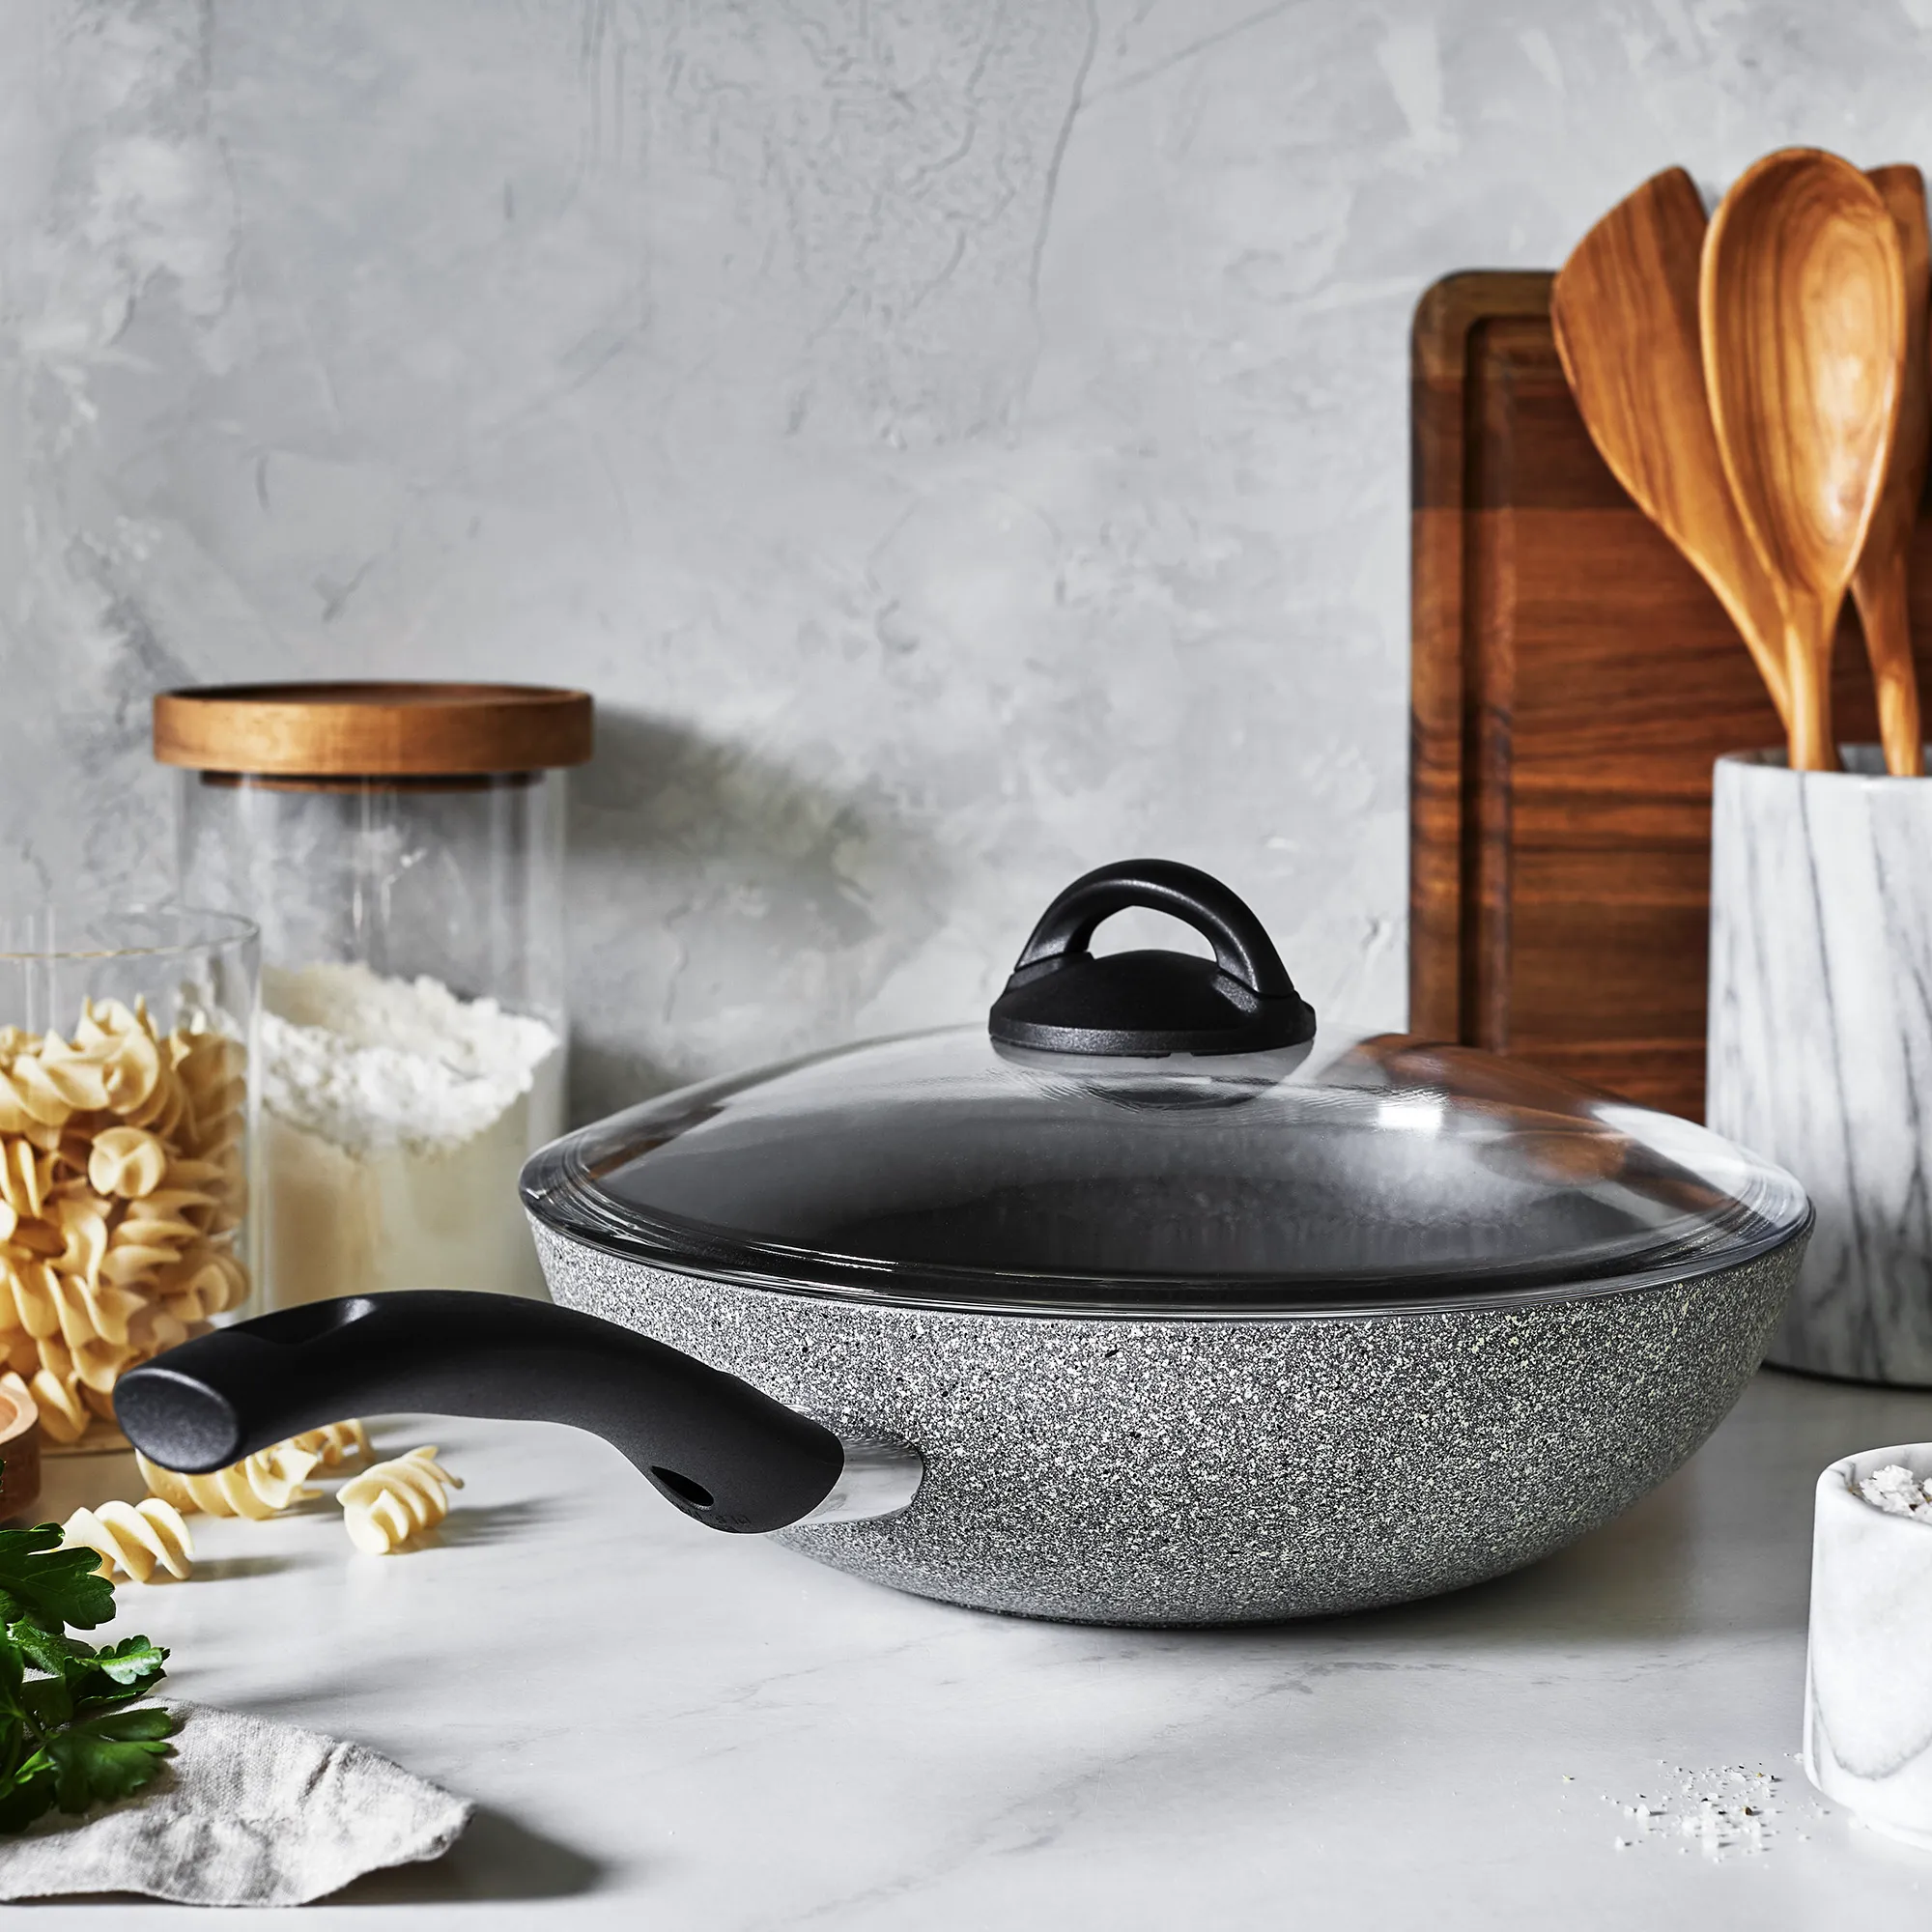 https://www.homethreads.com/files/zwilling/1010560-ballarini-parma-by-henckels-forged-aluminum-11-inch-nonstick-stir-fry-pan-with-lid-made-in-italy-2.webp